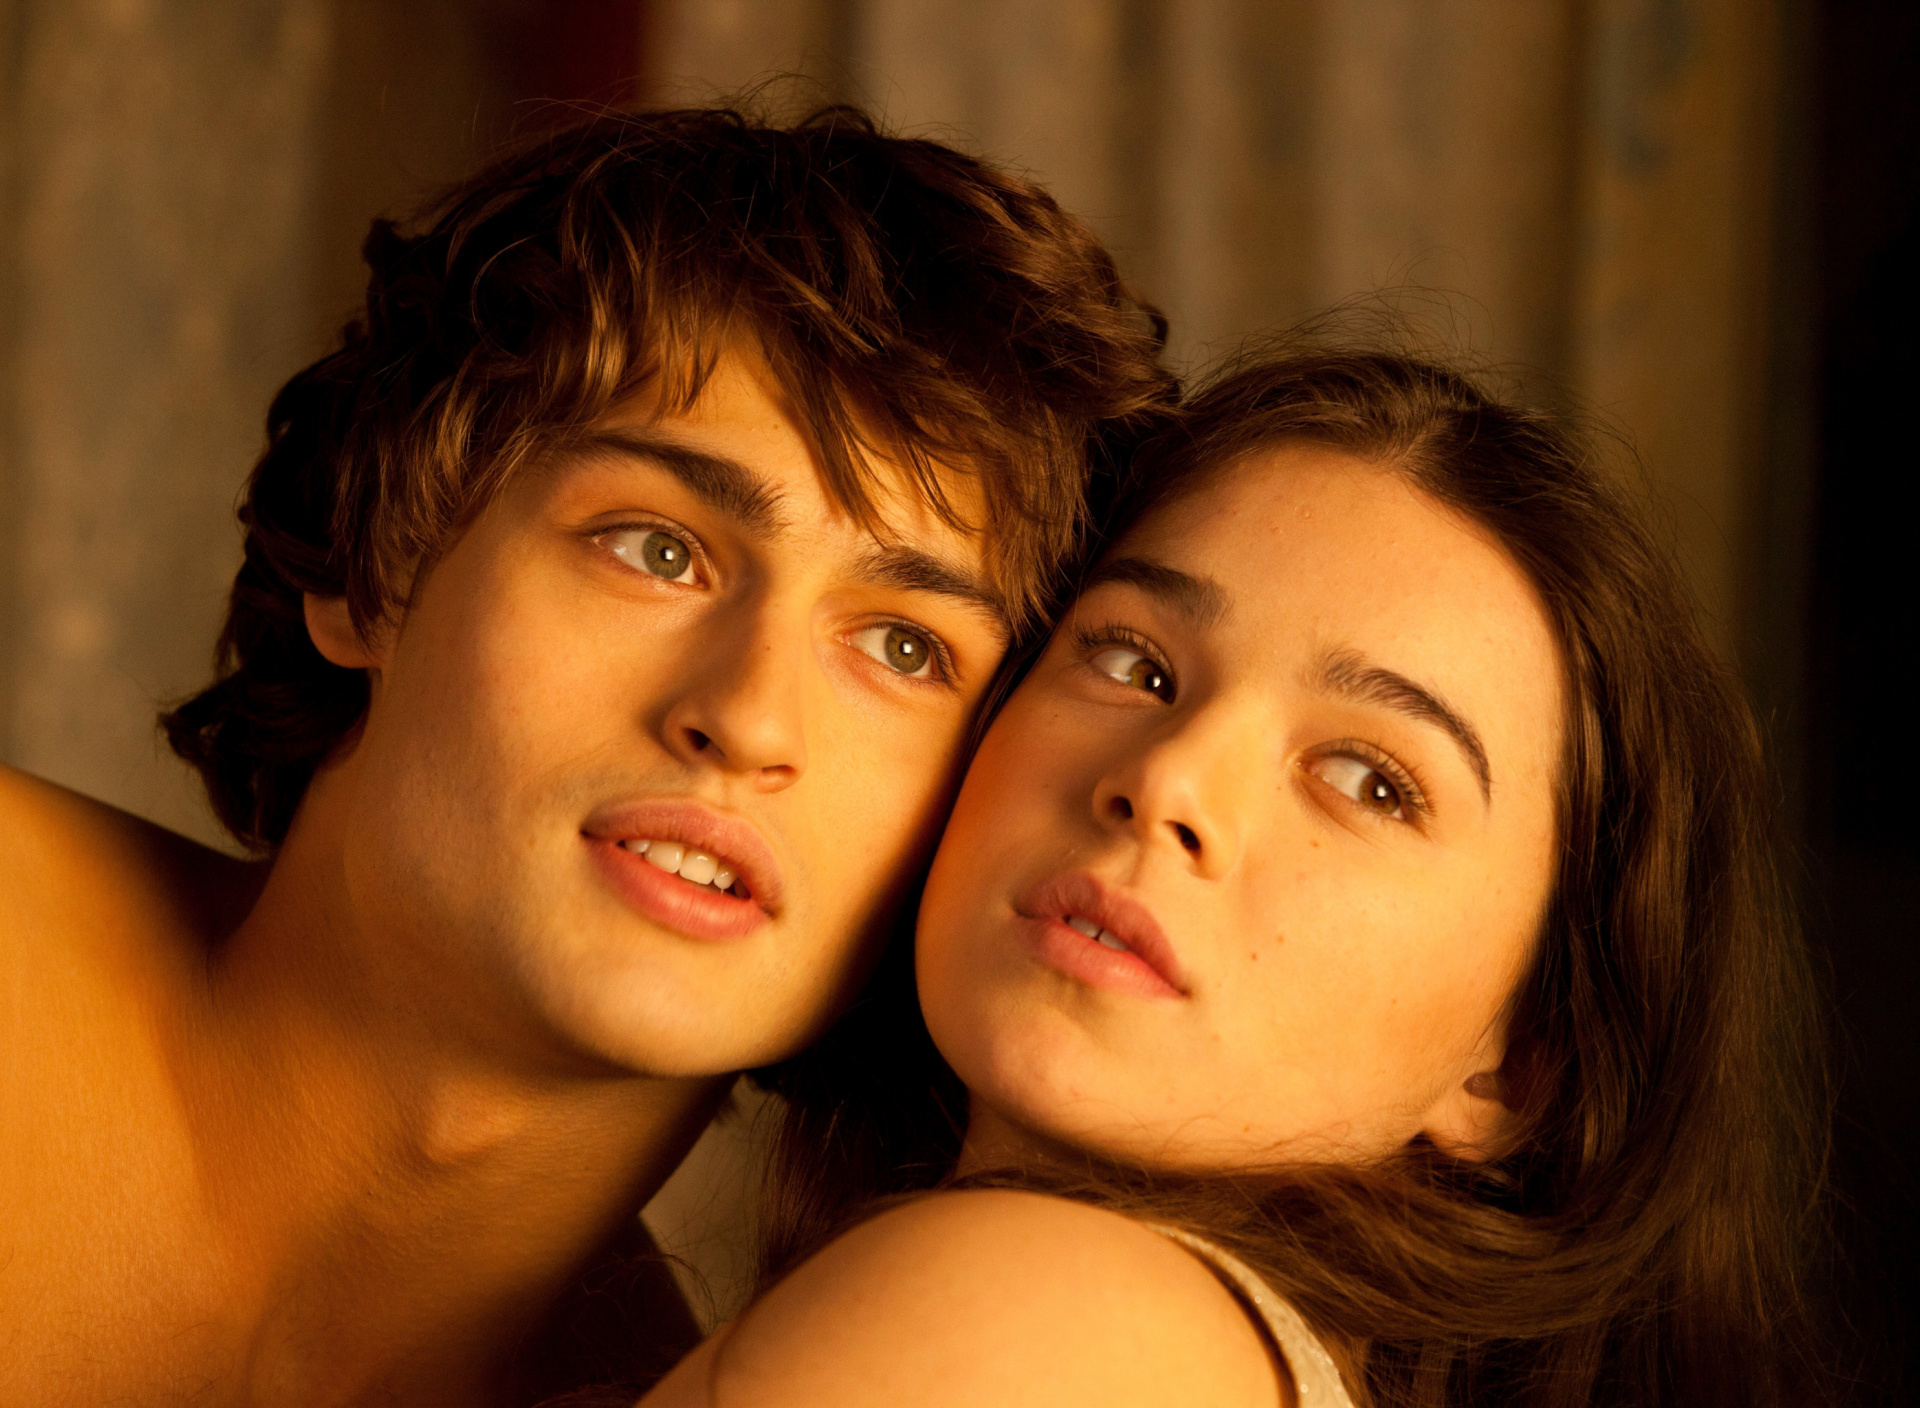 Romeo and Juliet with Hailee Steinfeld and Douglas Booth wallpaper 1920x1408